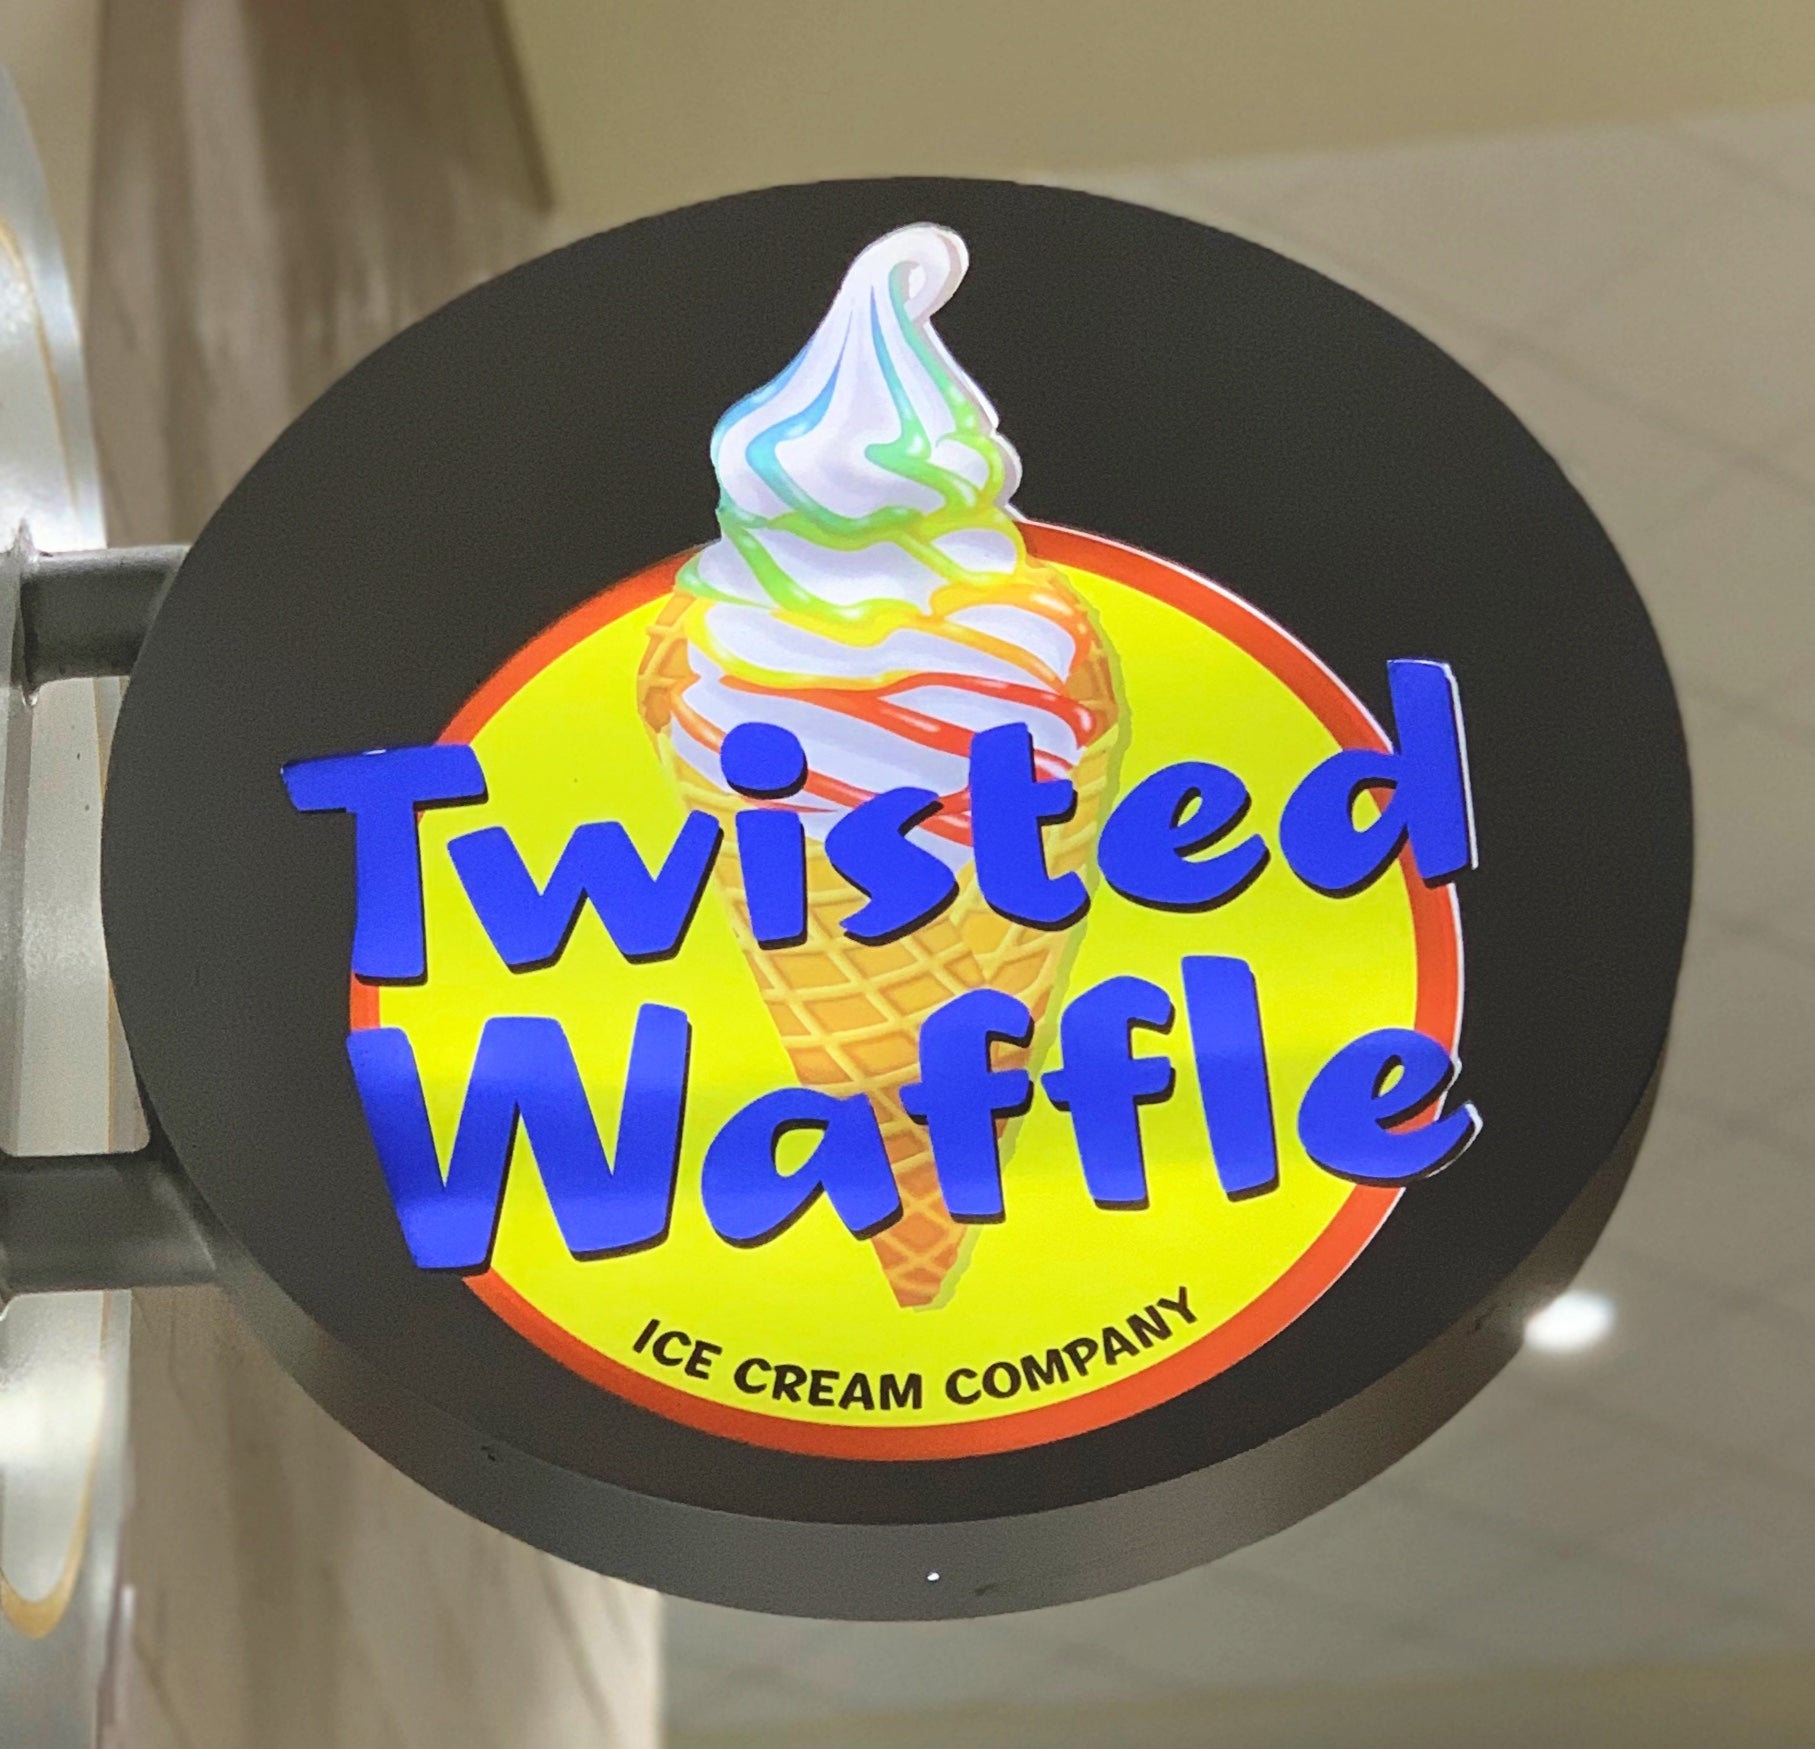 Twisted Waffle: Sections 116, 322*